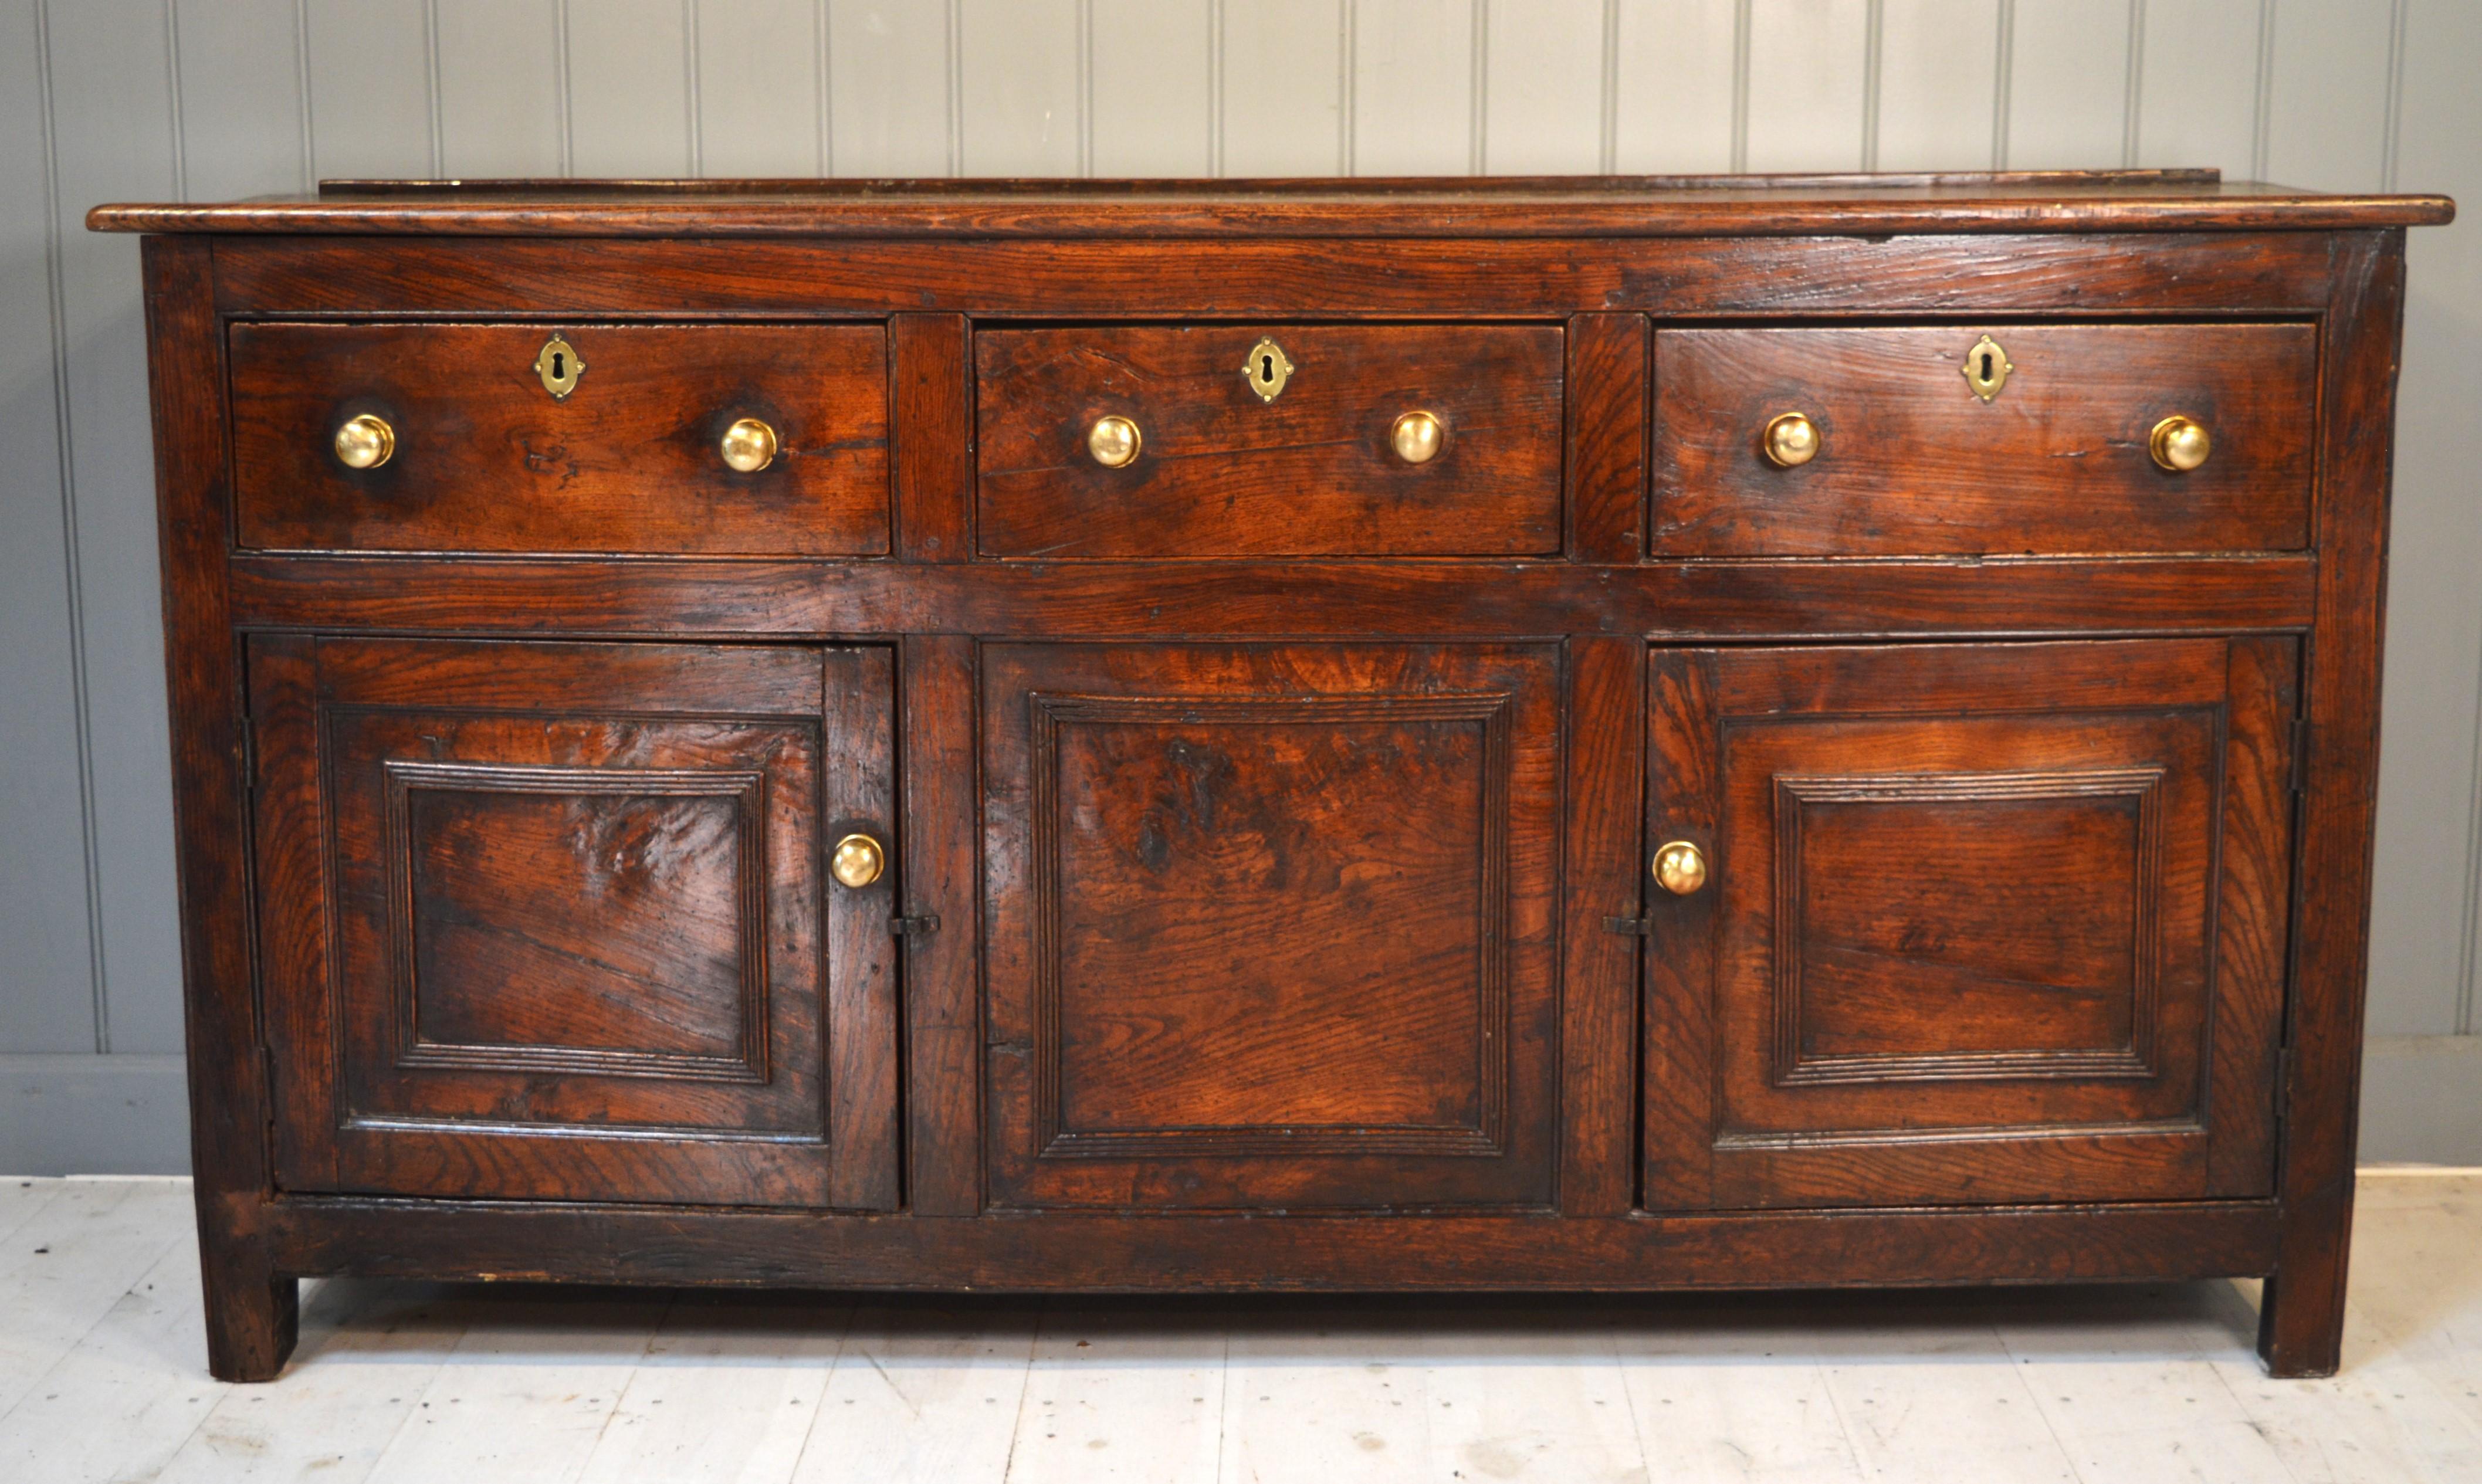 Here we have a warm colored elm dresser base of small proportions with three drawers and two cupboards. The grain is well figured and the patterns are artfully used in the construction. The doors and central panel are decorated with additional